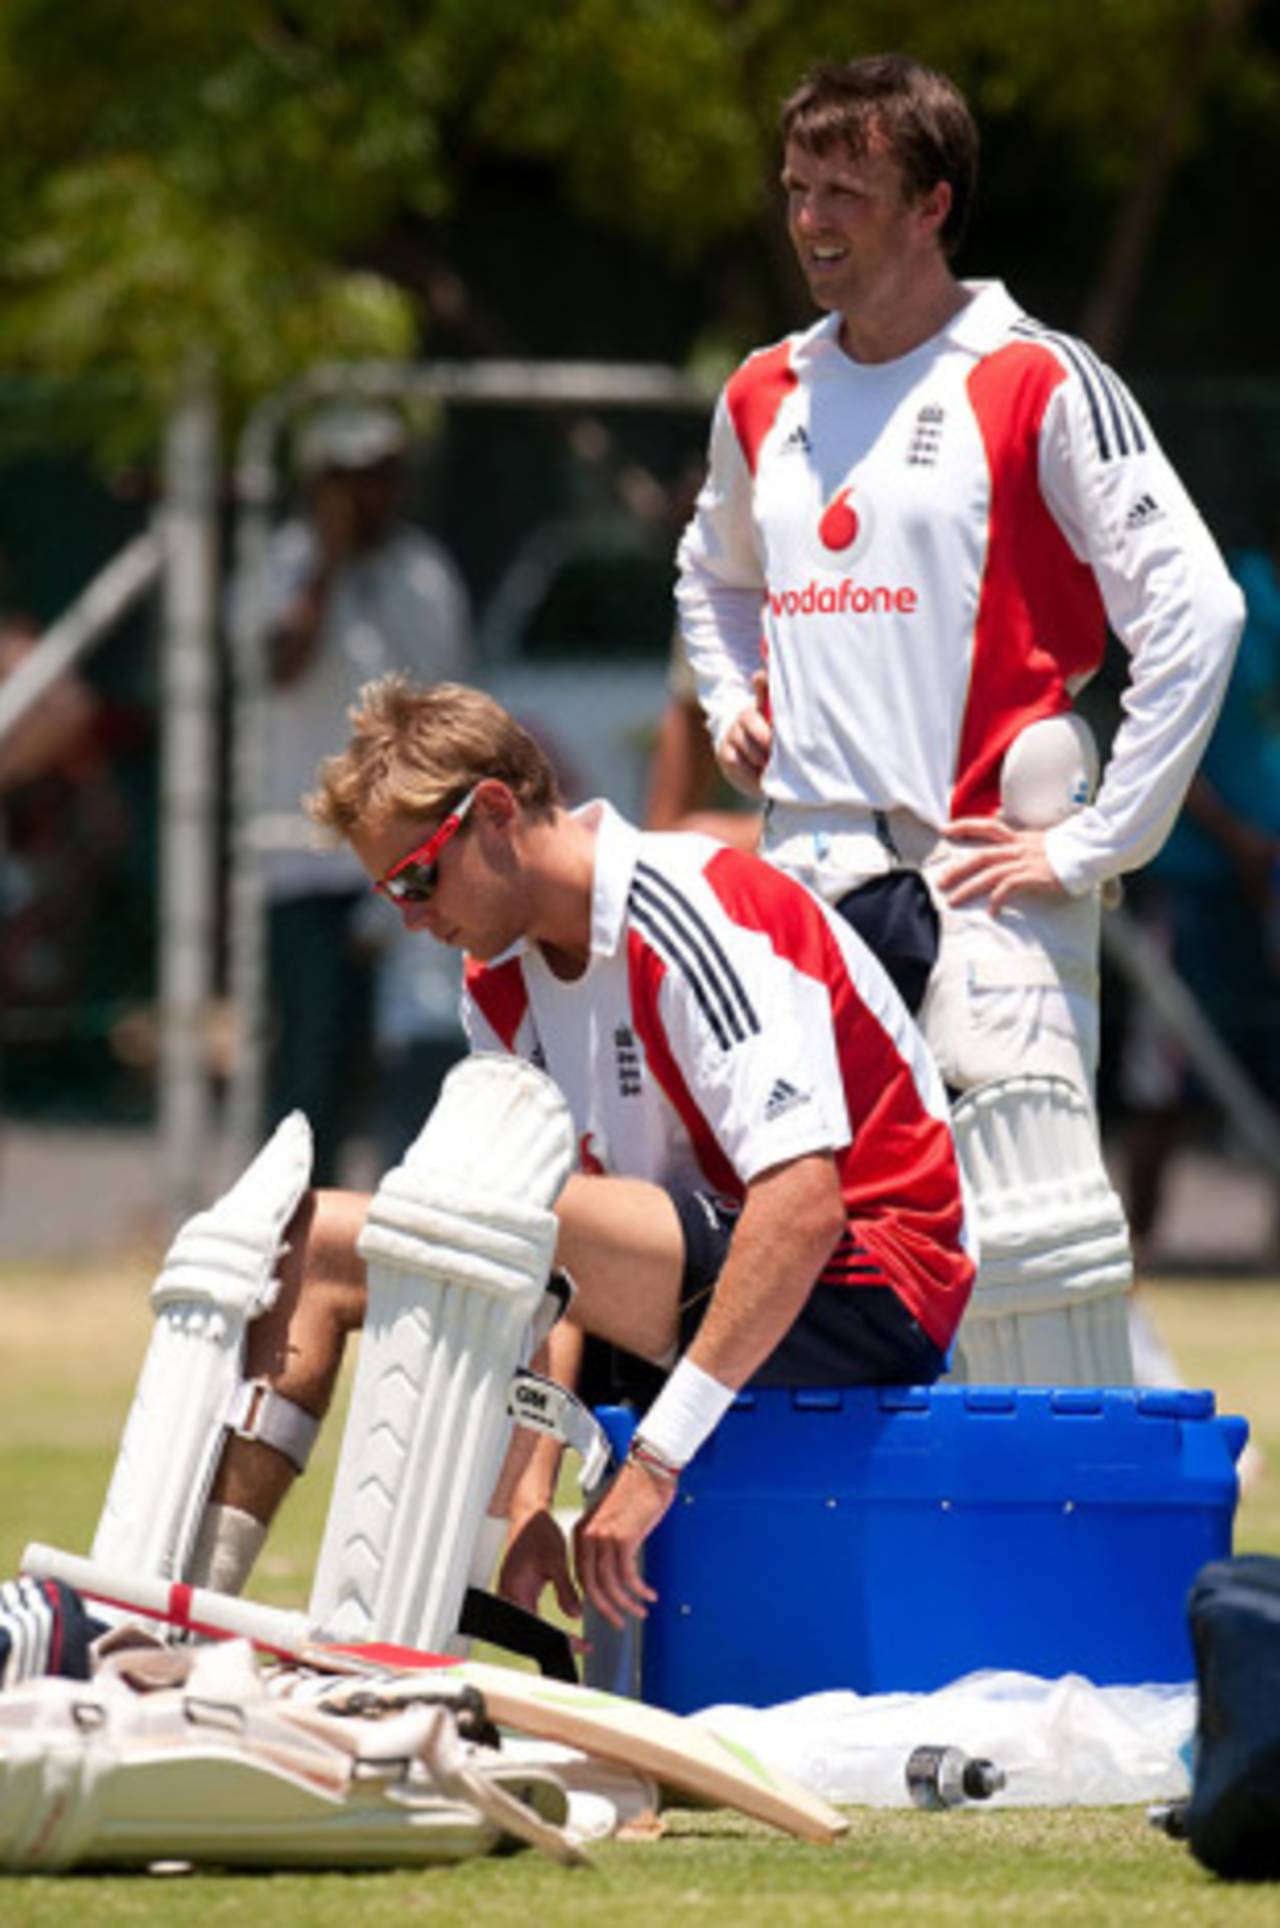 Stuart Broad and Graeme Swann, England's match winners in Durban, prepare for the third Test, Cape Town, January 2, 2010